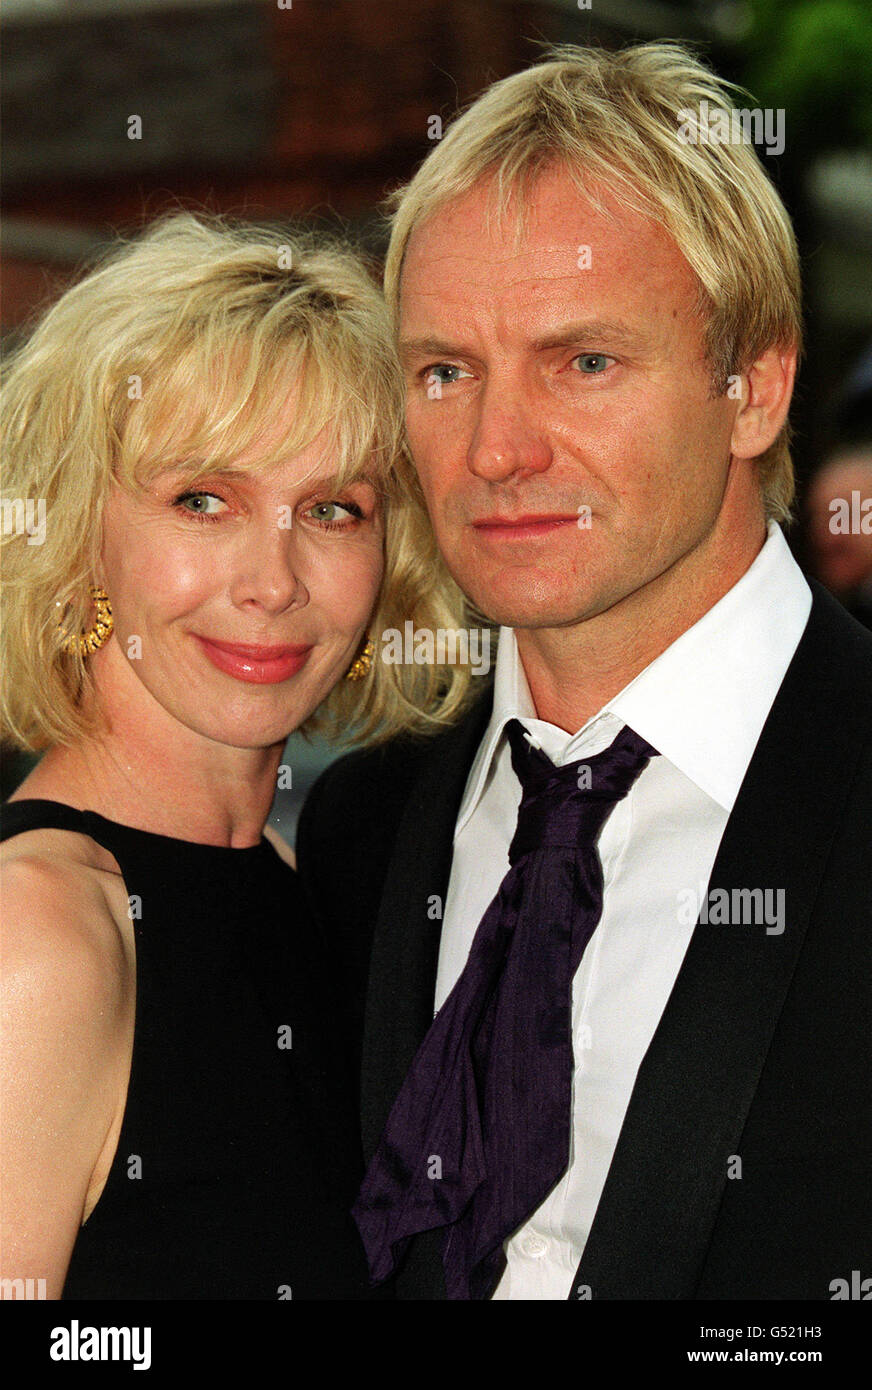 Sting and Trudie Styler Serp Gallery. Sting accompanied by his wife Trudie Styler arriving at The Serpentine Gallery 30th Anniversary Gala Dinner. Stock Photo